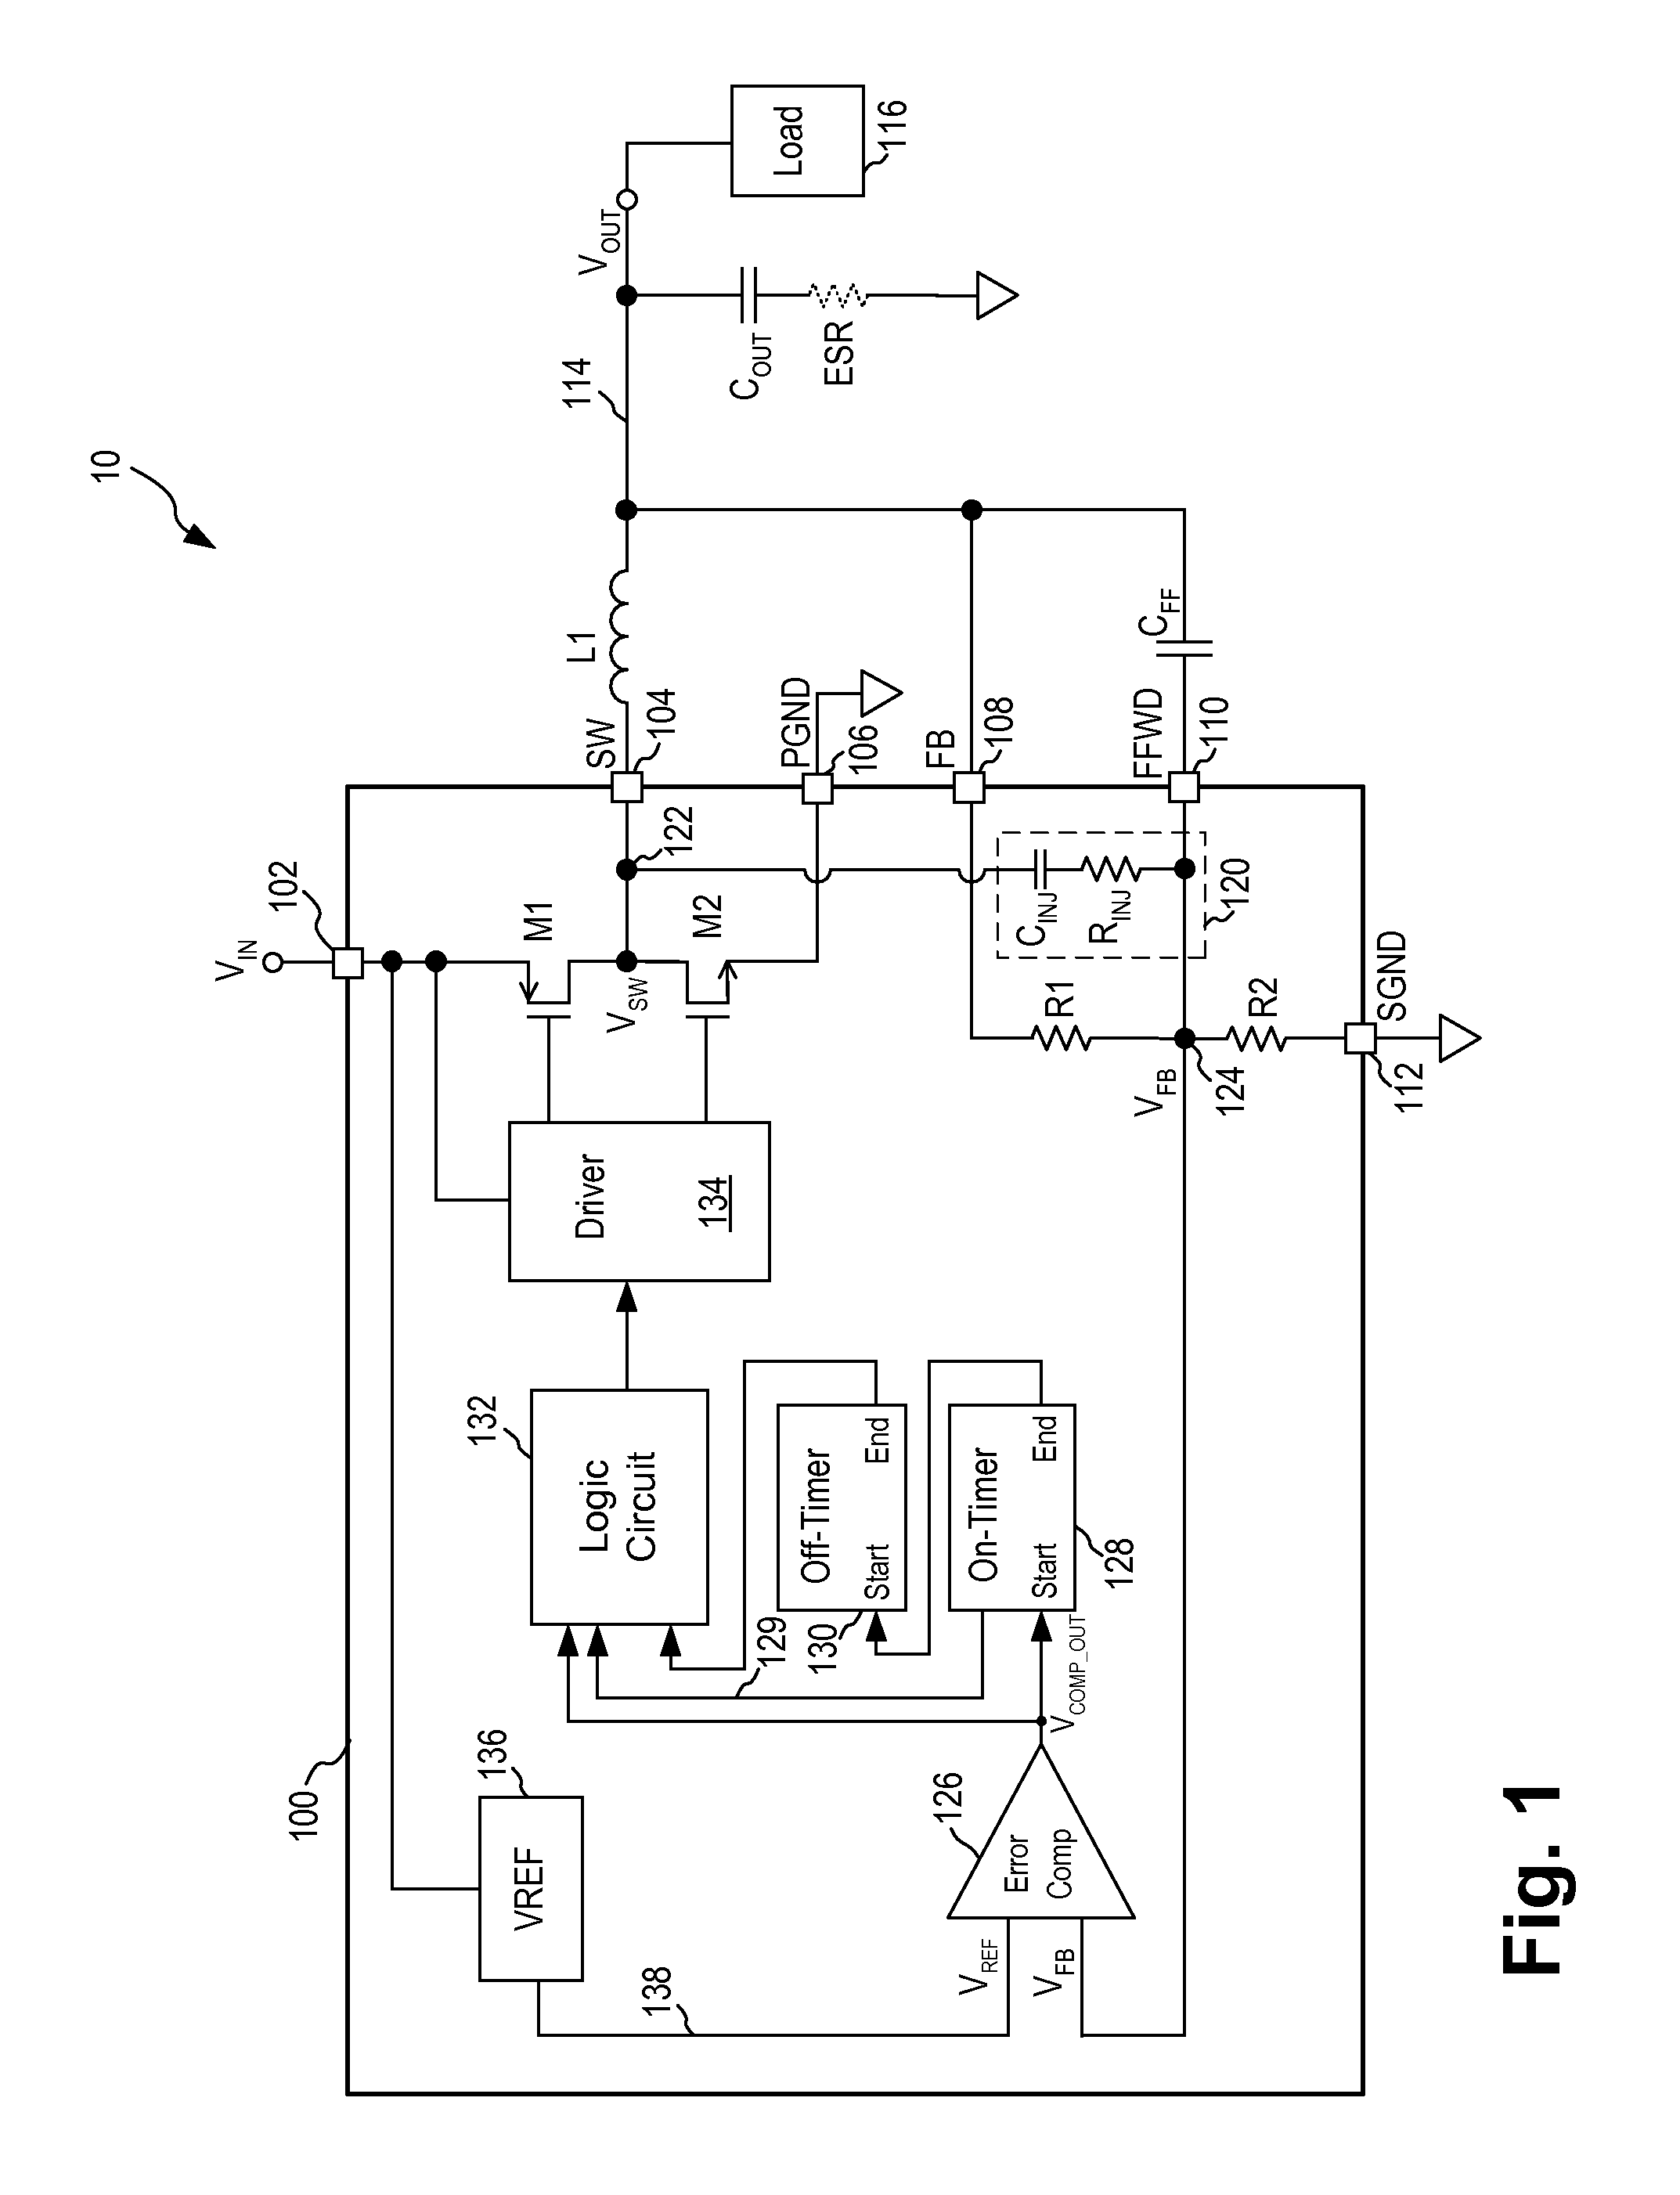 Constant On-Time Regulator With Increased Maximum Duty Cycle